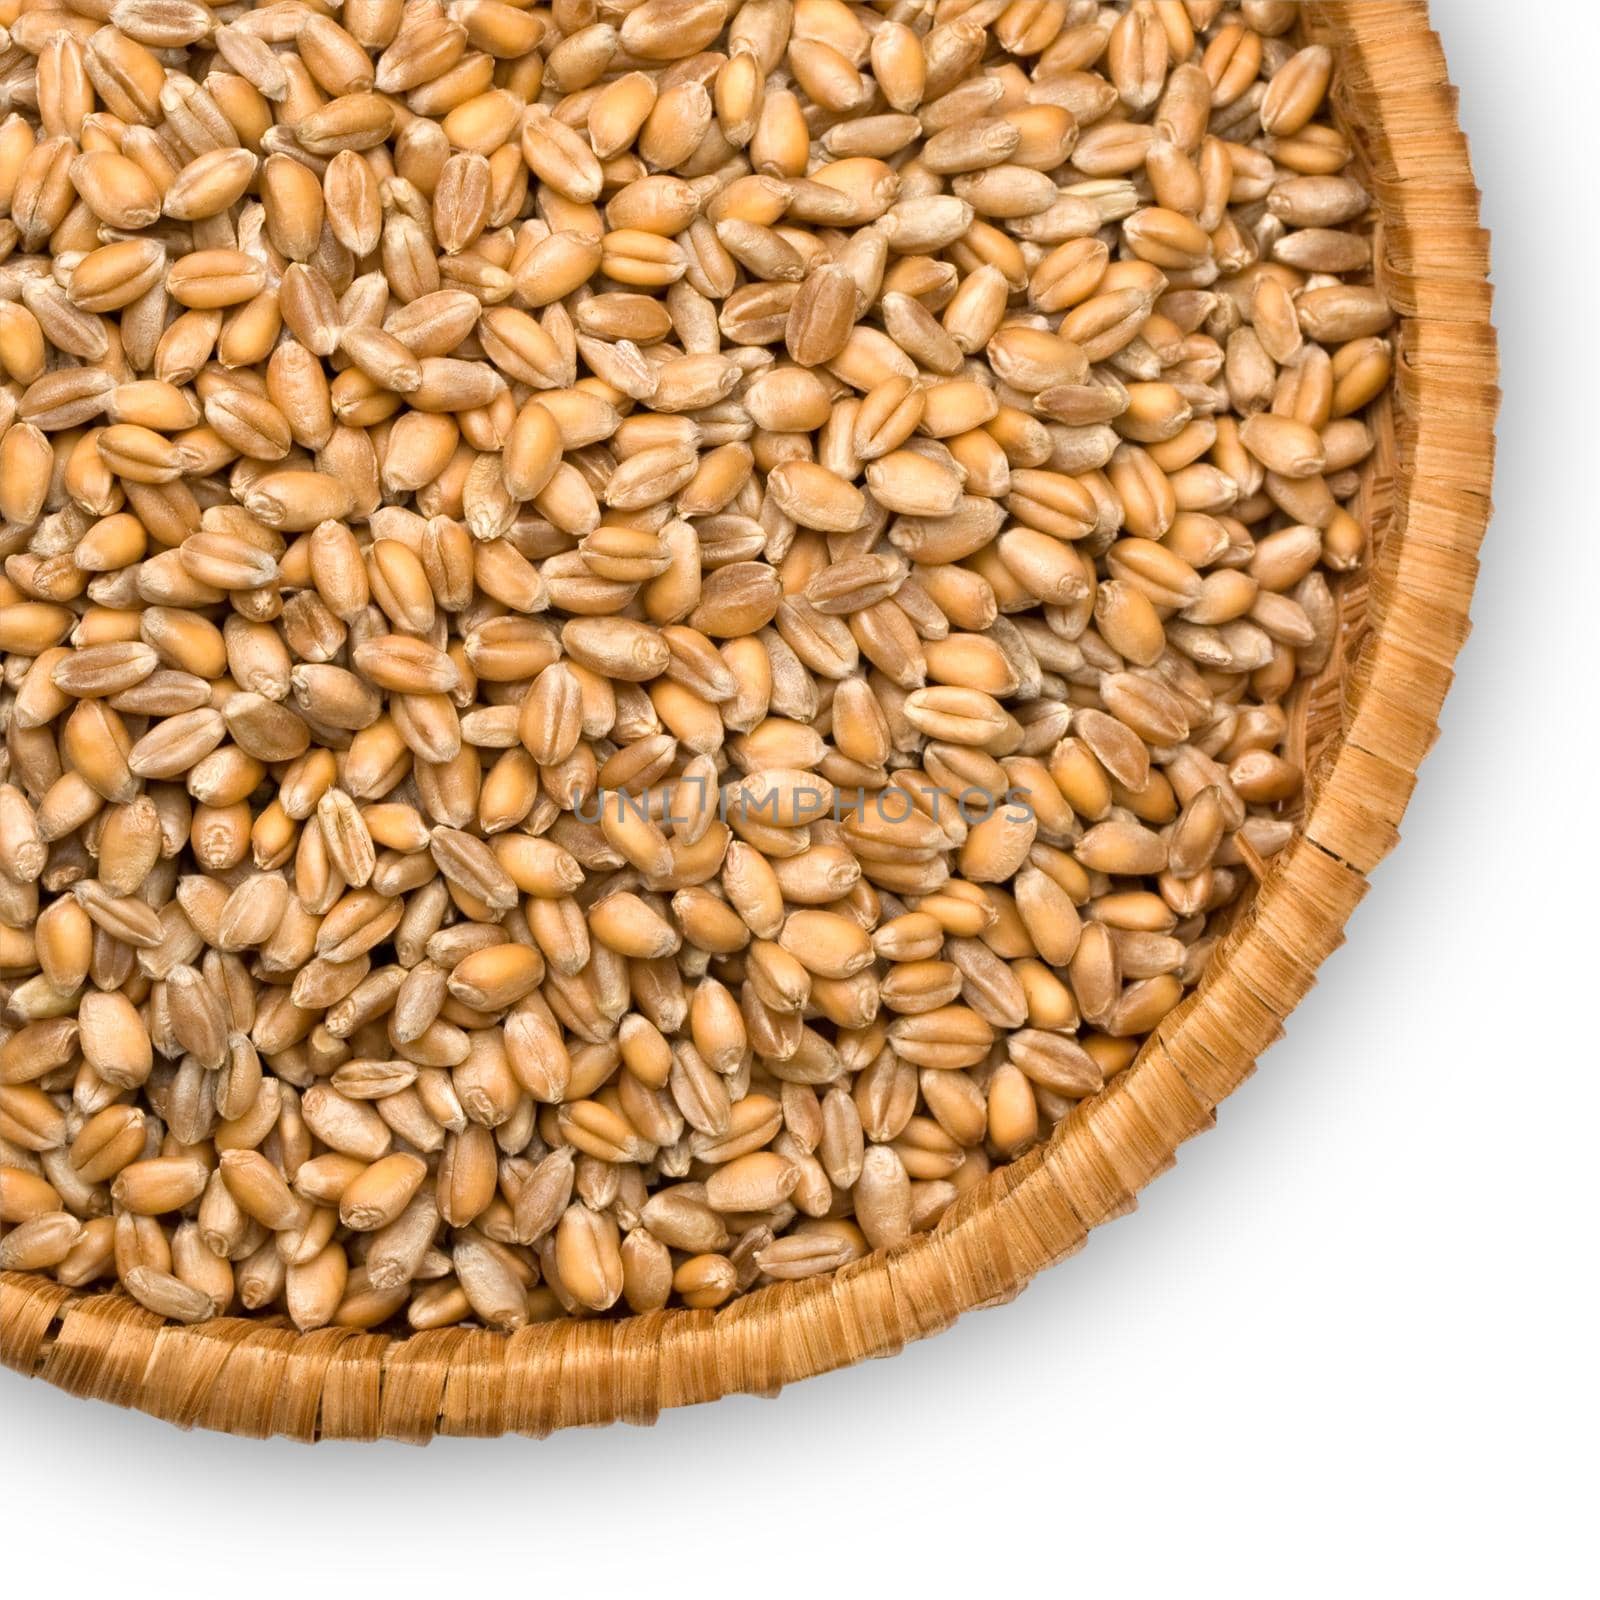 wheat  close-up on a plate of straw isolated on white background